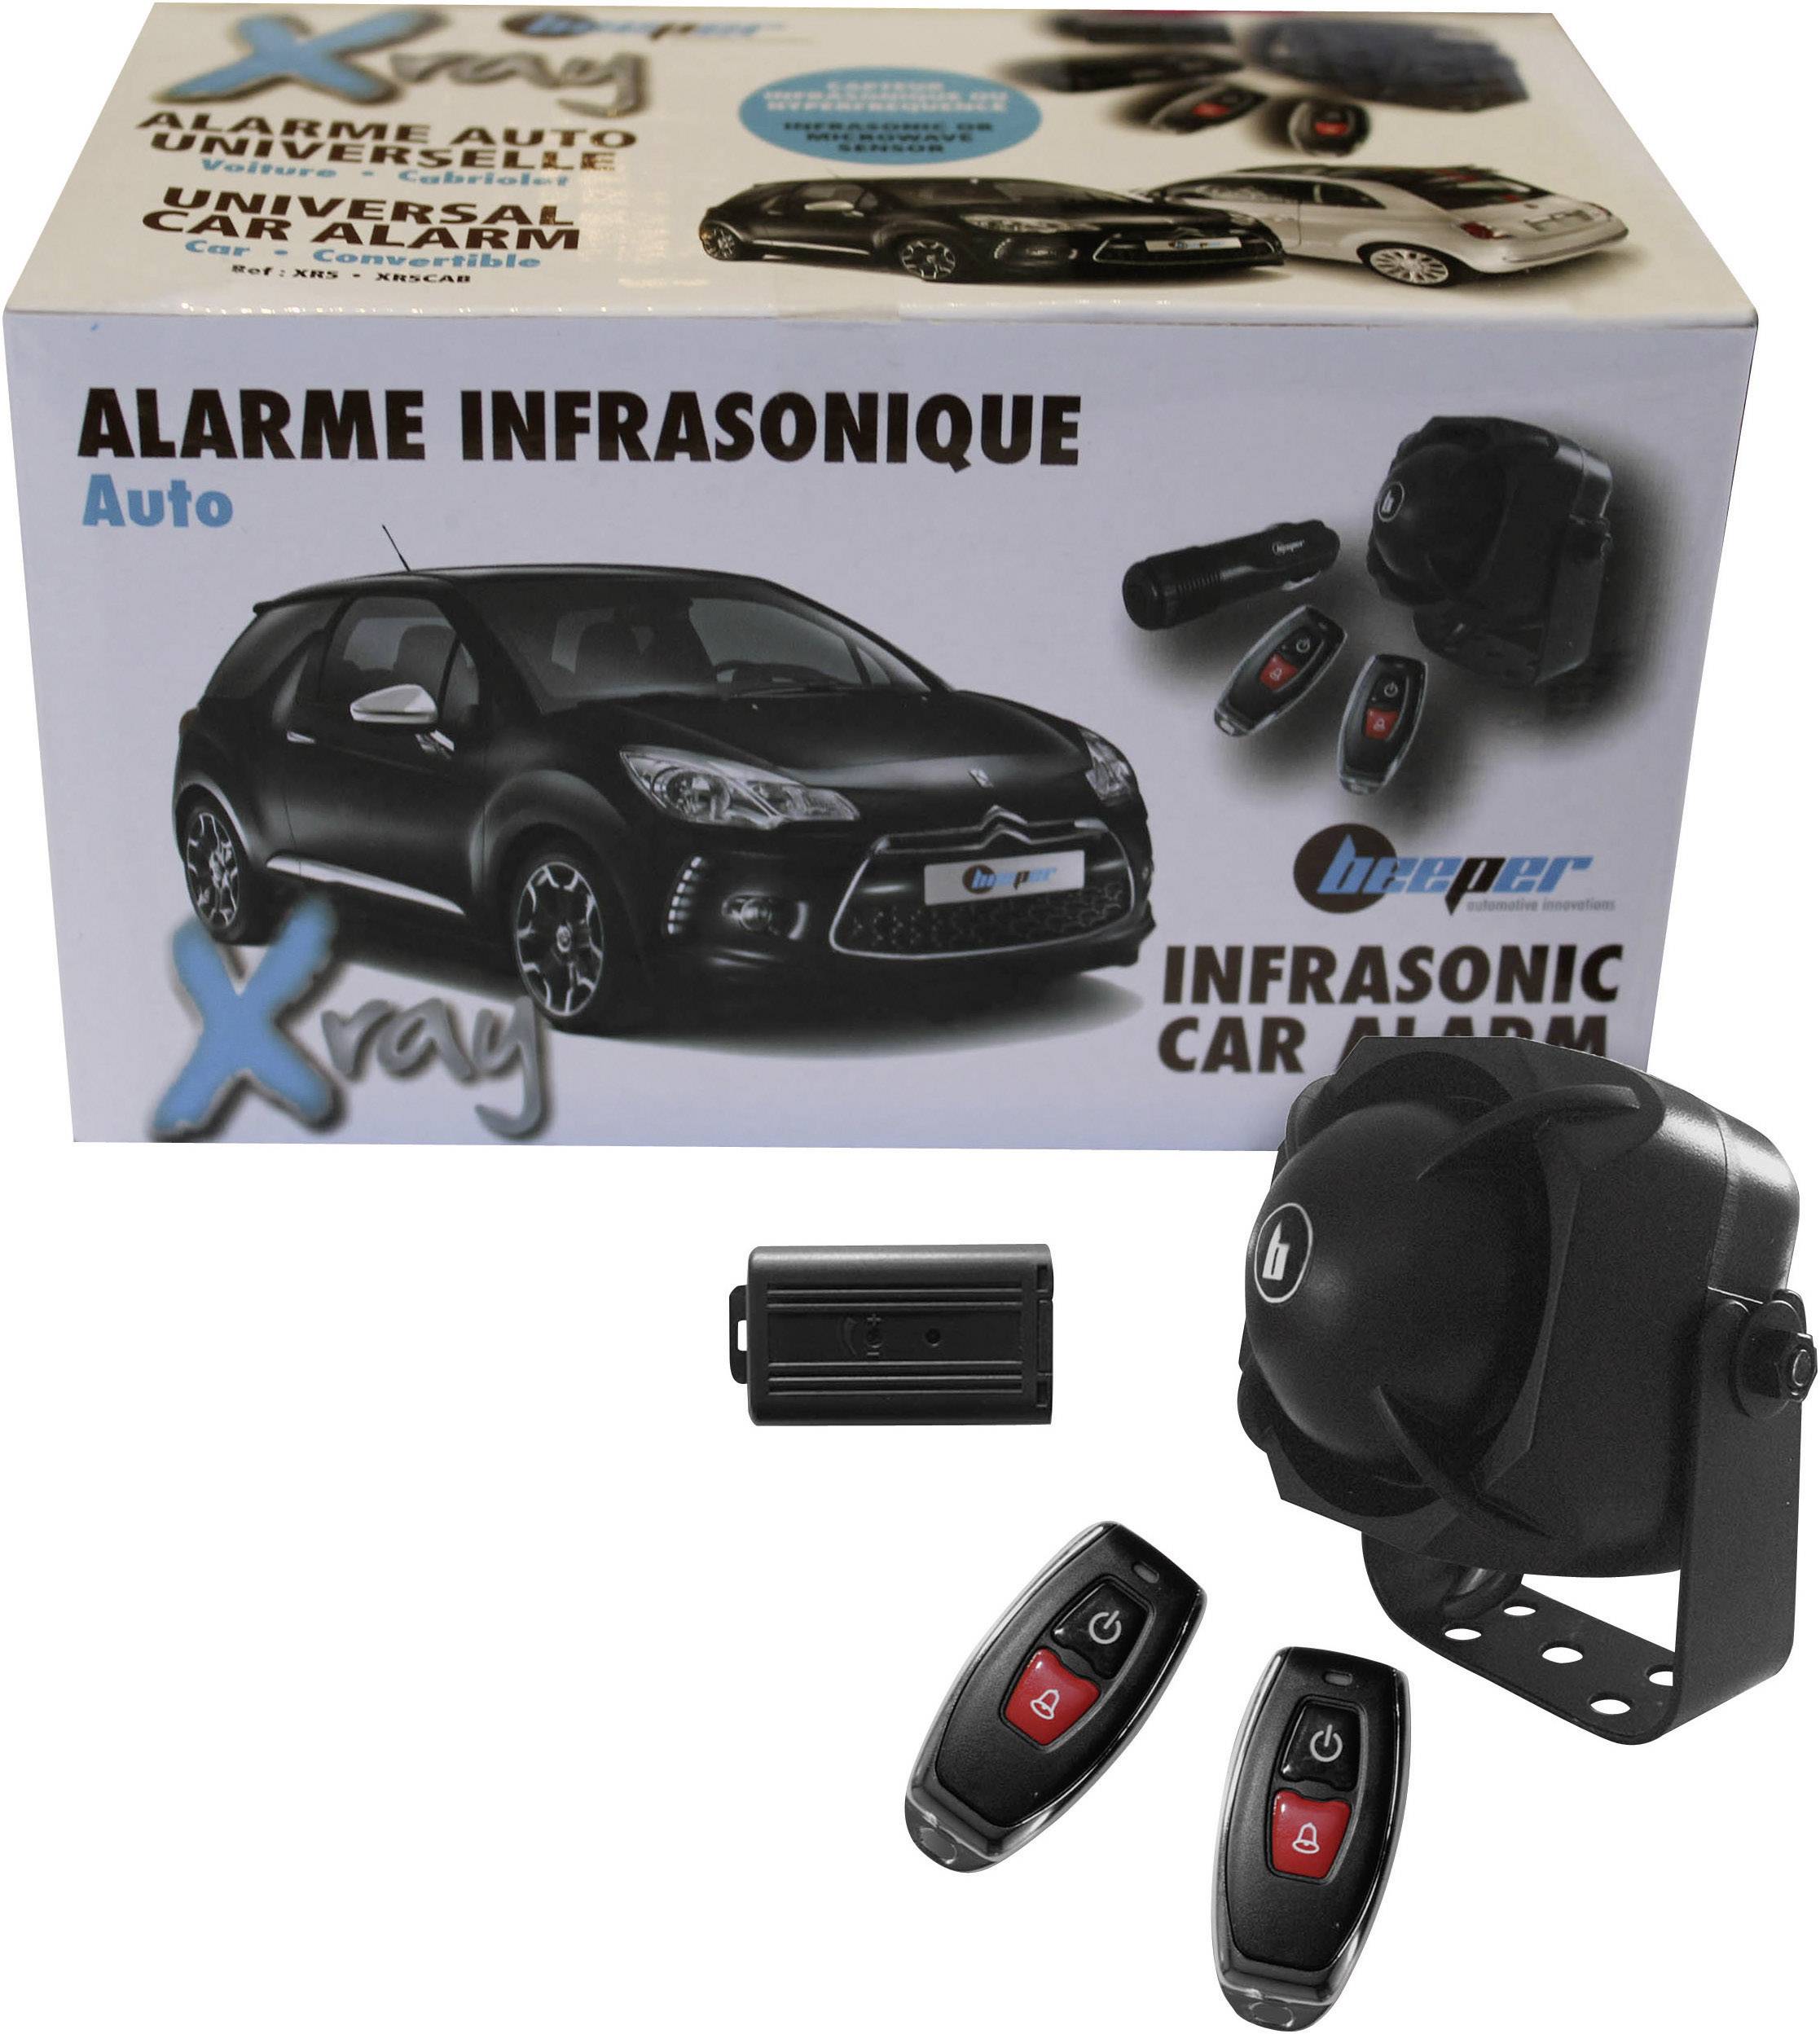 Beeper Alarme auto universelle  XR5 